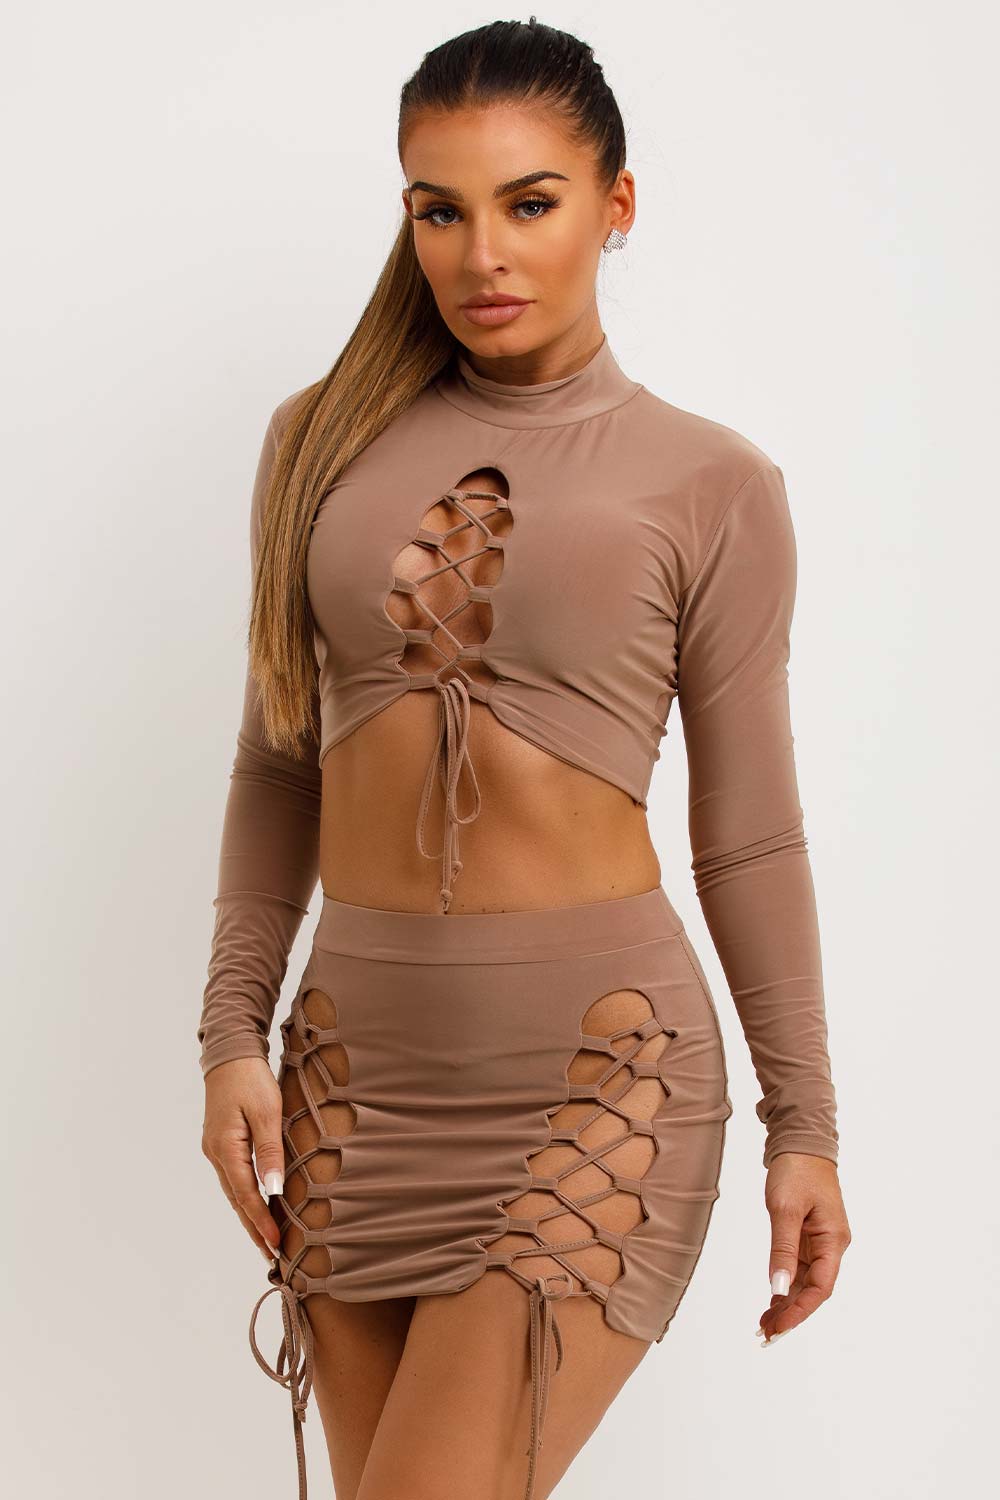 cut out lace up skirt and long sleeve high neck crop top co ord set festival rave going out outfit